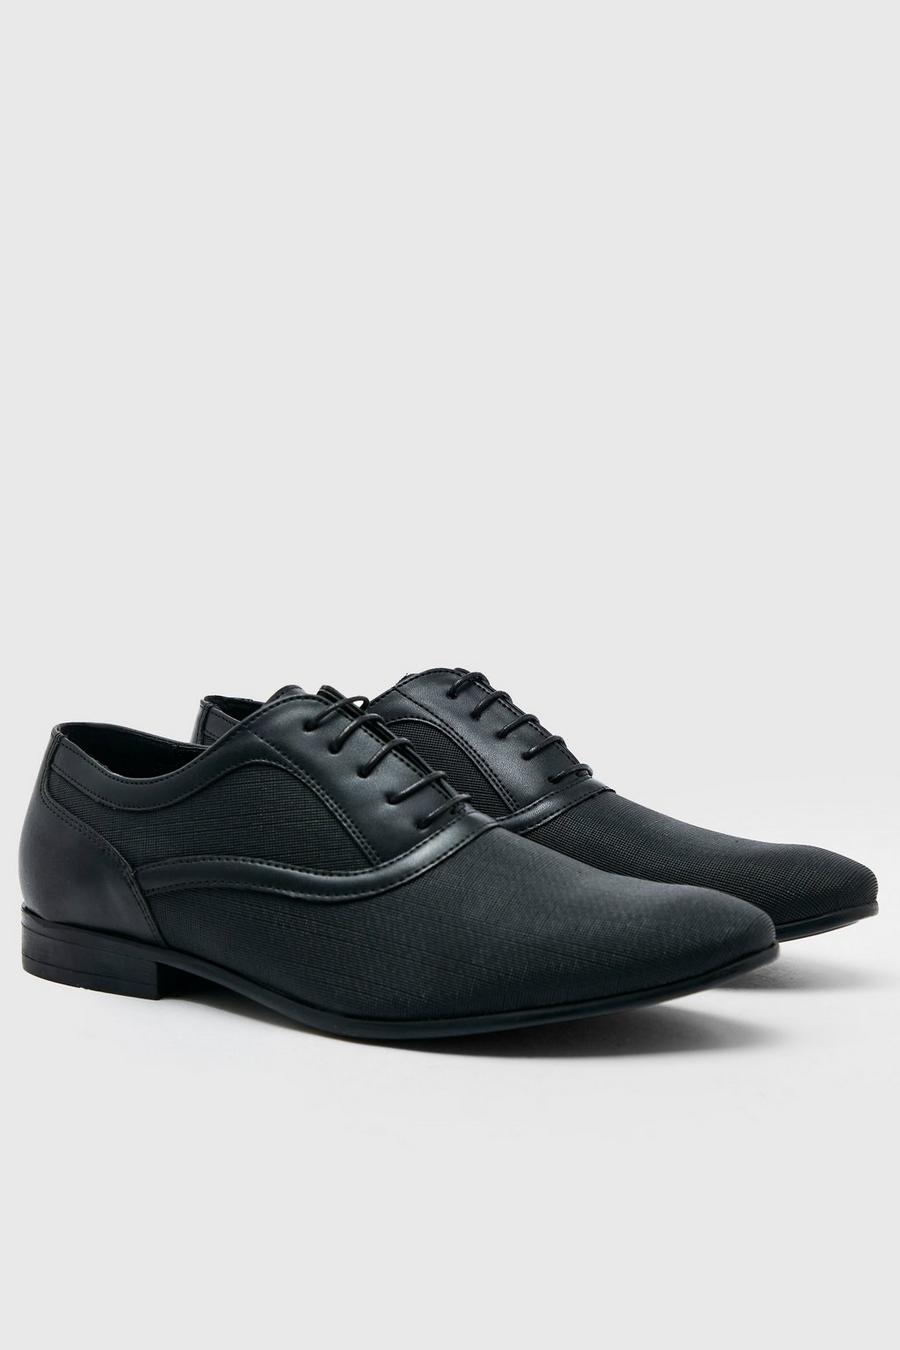 Giacca Oxford in pelle sintetica con incisioni, Black negro image number 1